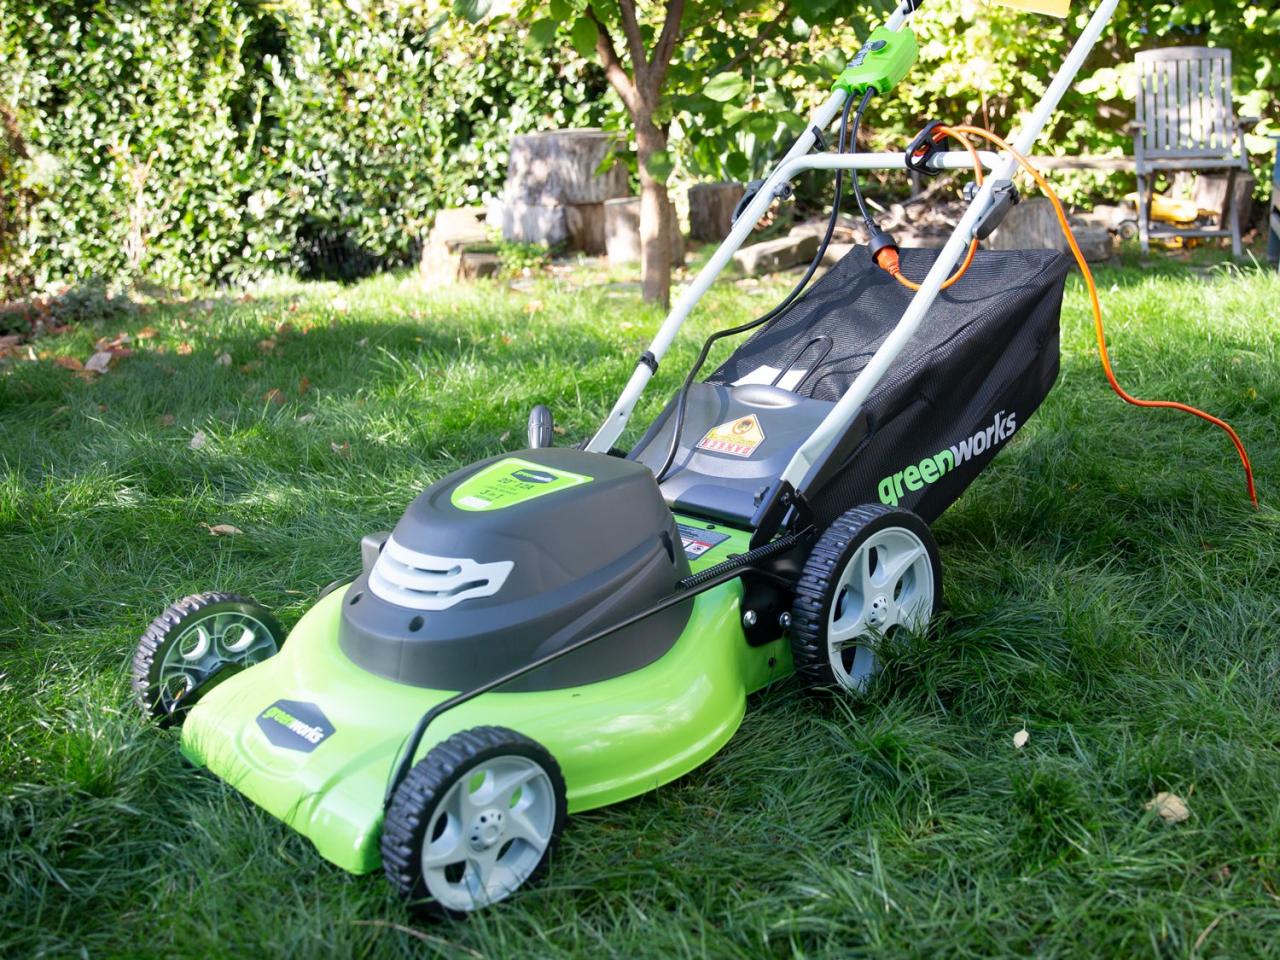 Greenworks 25022 Lawn Mower Review: An Eco-Friendly Electric Mower